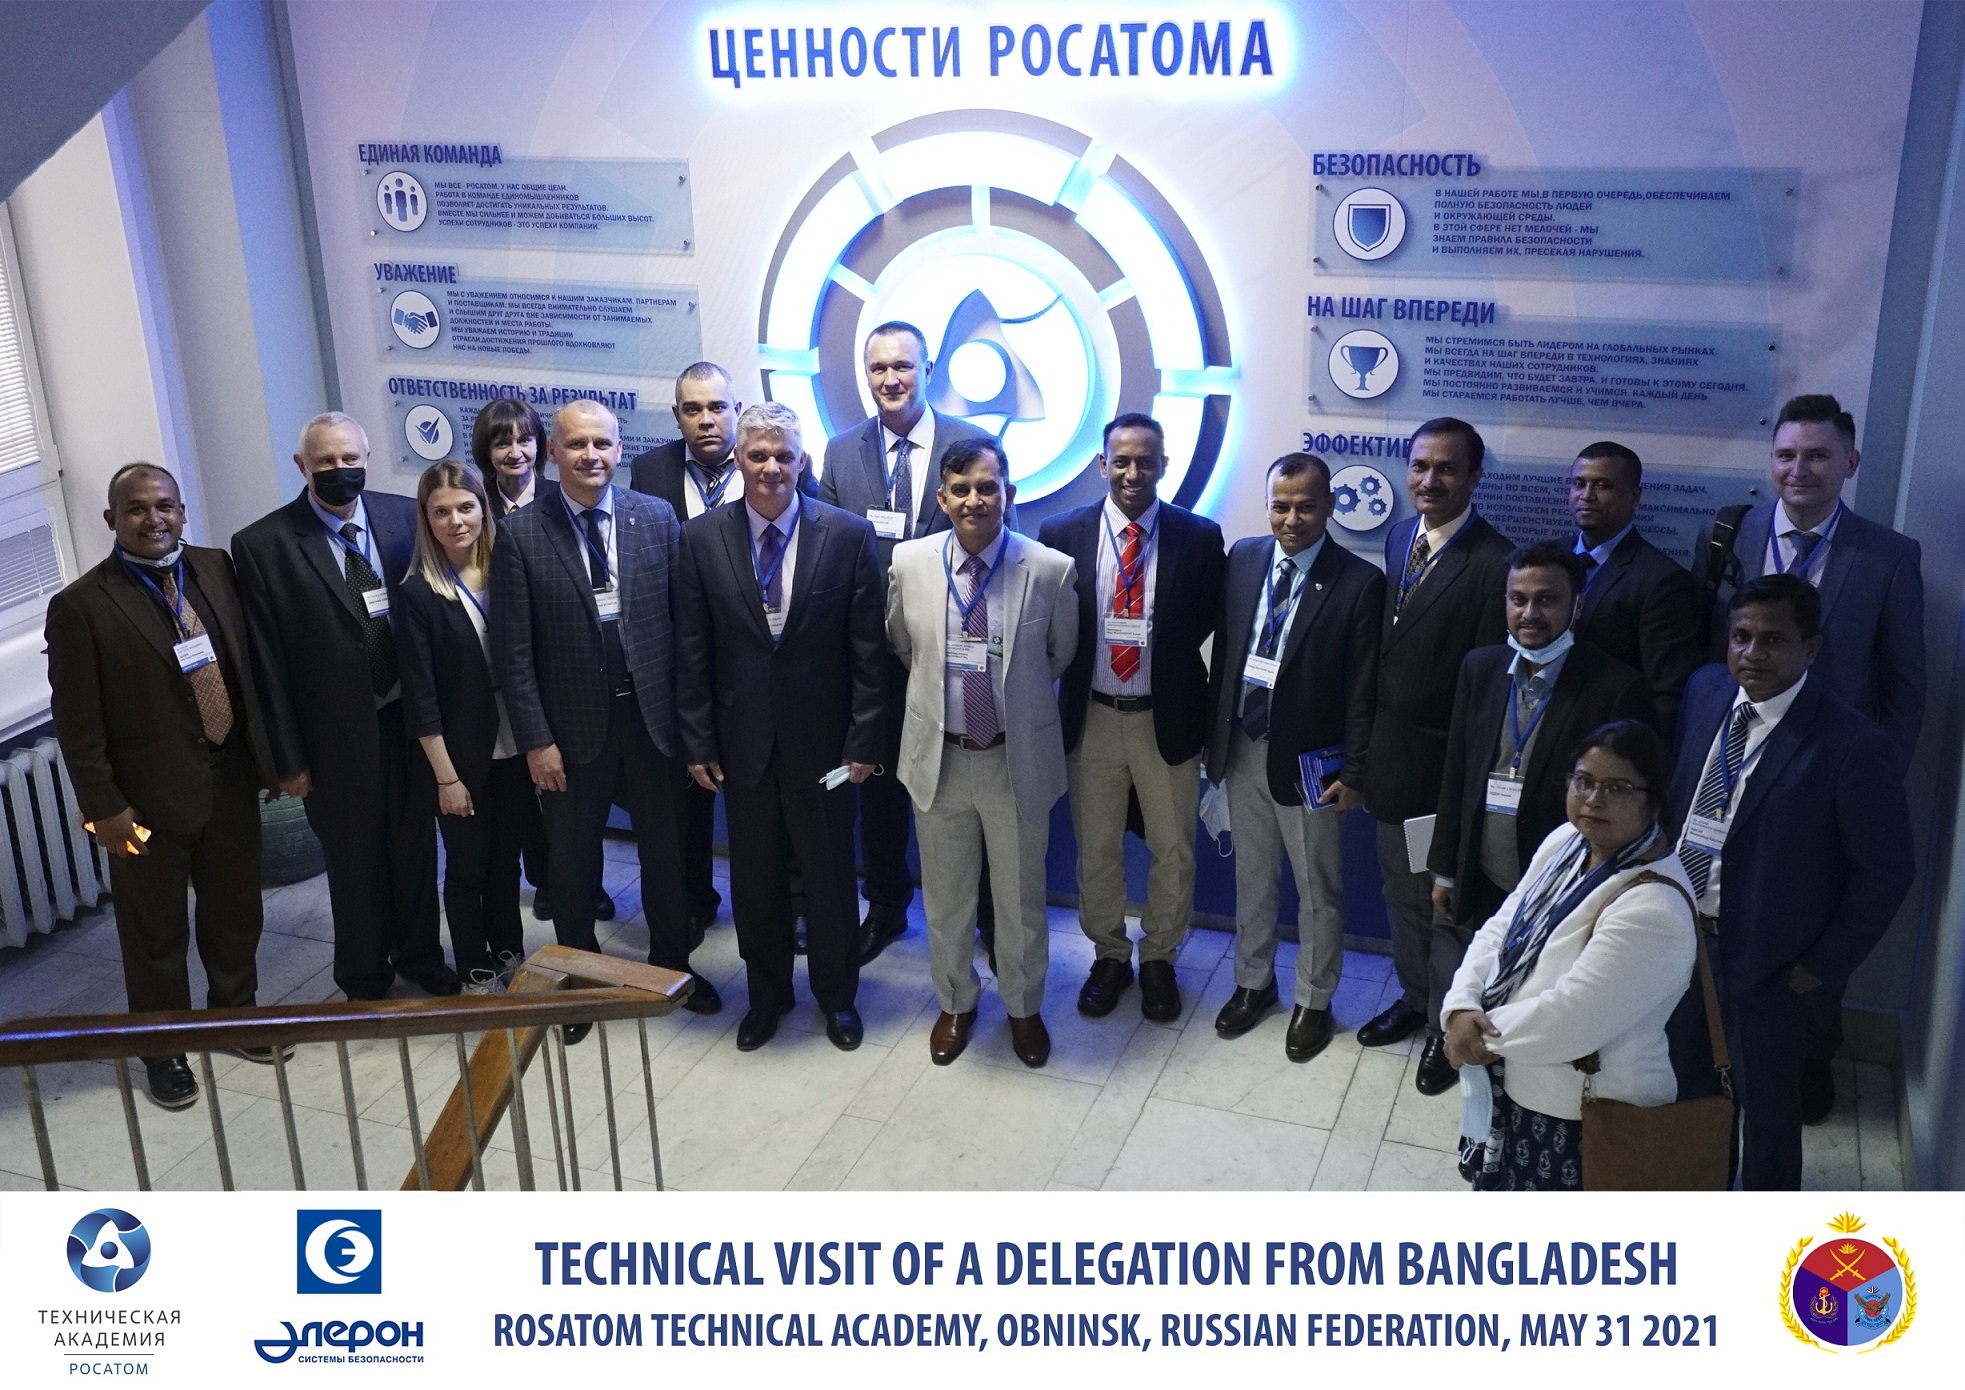 A delegation of representatives of the People's Republic of Bangladesh visited the Rosatom Technical Academy